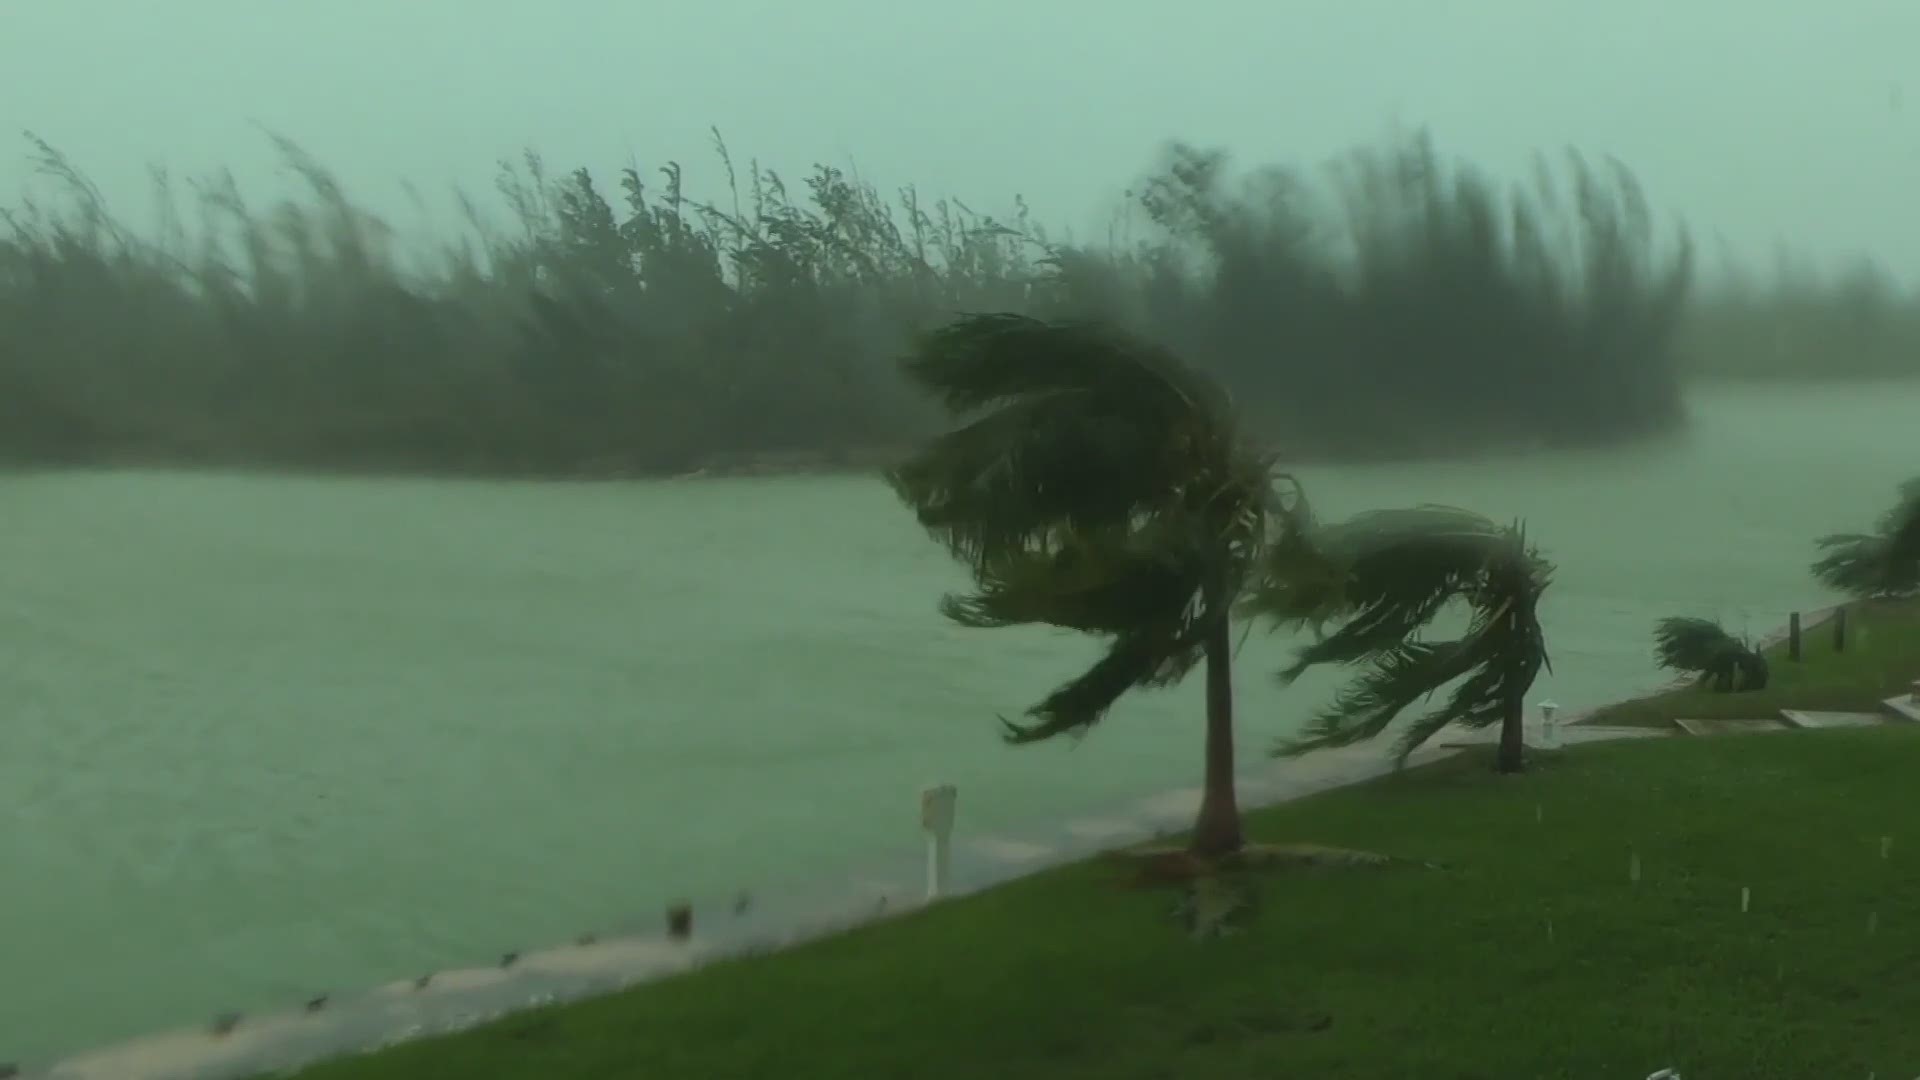 Video from Freeport in the Bahamas show proof of Hurricane Dorian's strength as heavy rain and strong gusts of wind whipped coastal waters and violently blew palm trees. (AP)